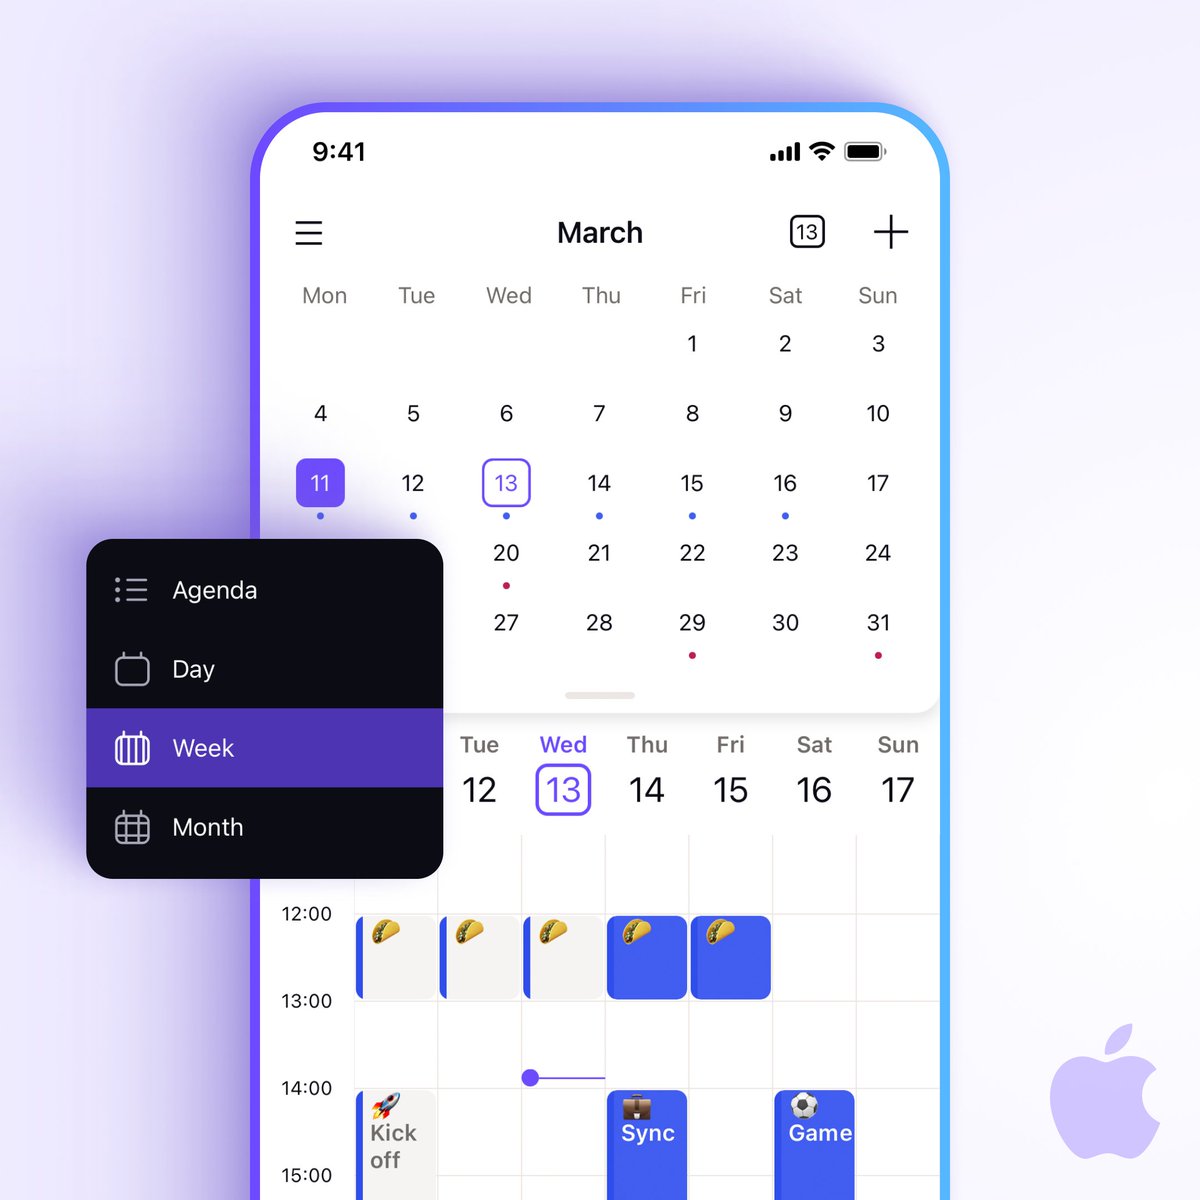 🗓️ New week, new feature! Week view is now available in #ProtonCalendar for #iOS. Now you can see your week at a glance and plan your time more efficiently by choosing between agenda, day, week, and month views. ➡️ If you haven’t already, download Proton Calendar for iOS here:…